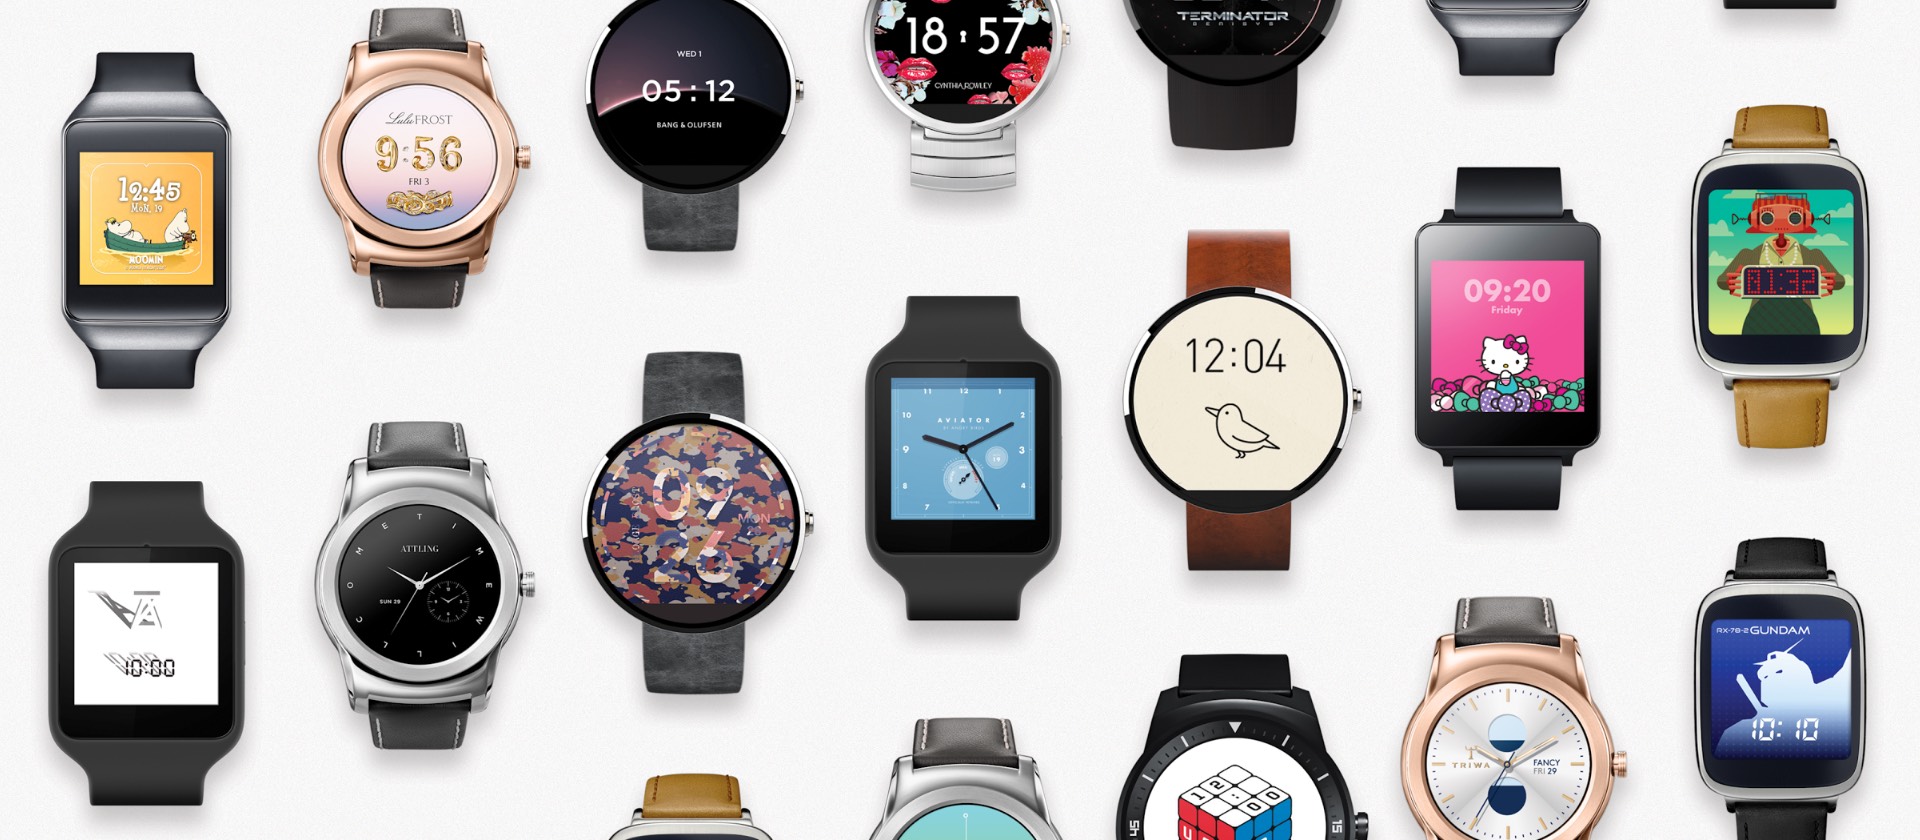 A selection of Android Wear watches